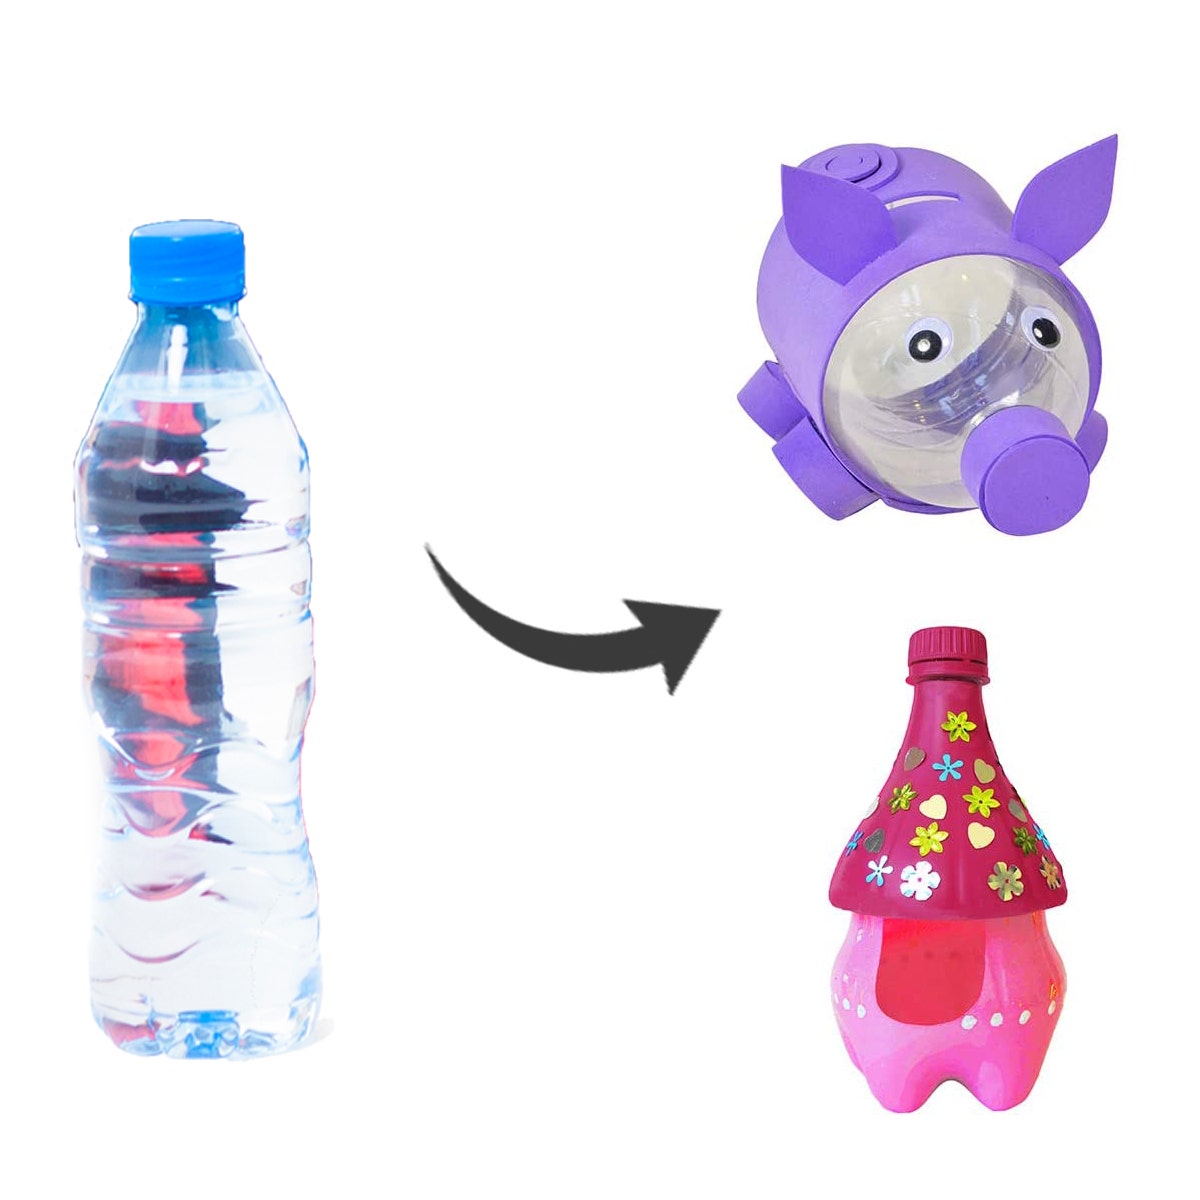 Buzzy ReCycleMe Art Set – Toy Projects From Plastic Bottles